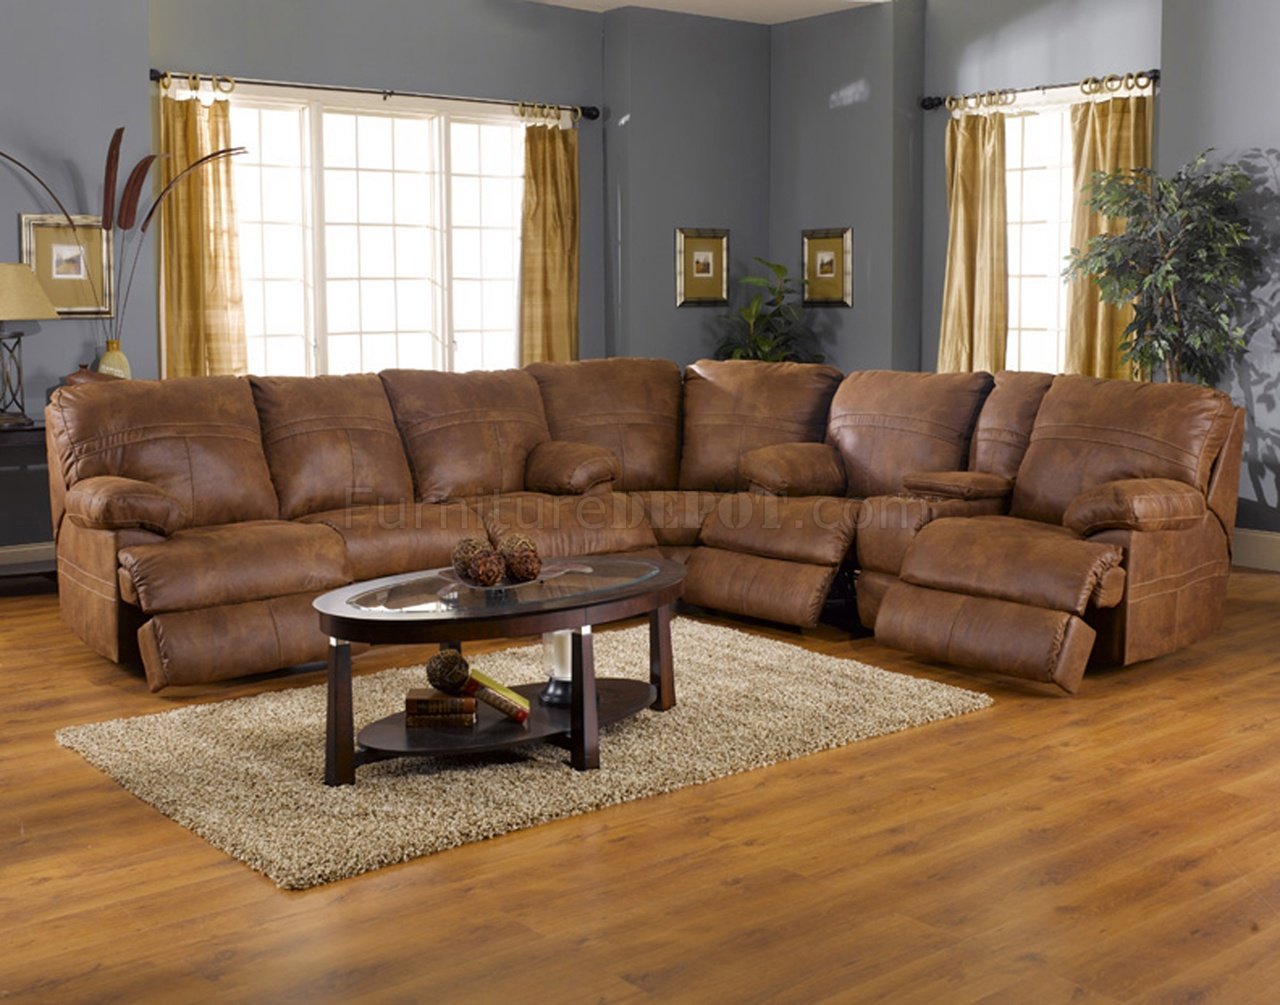 Rich Tanner Faux Leather Fabric Ranger, Sleeper Sofa Sectional Faux Leather